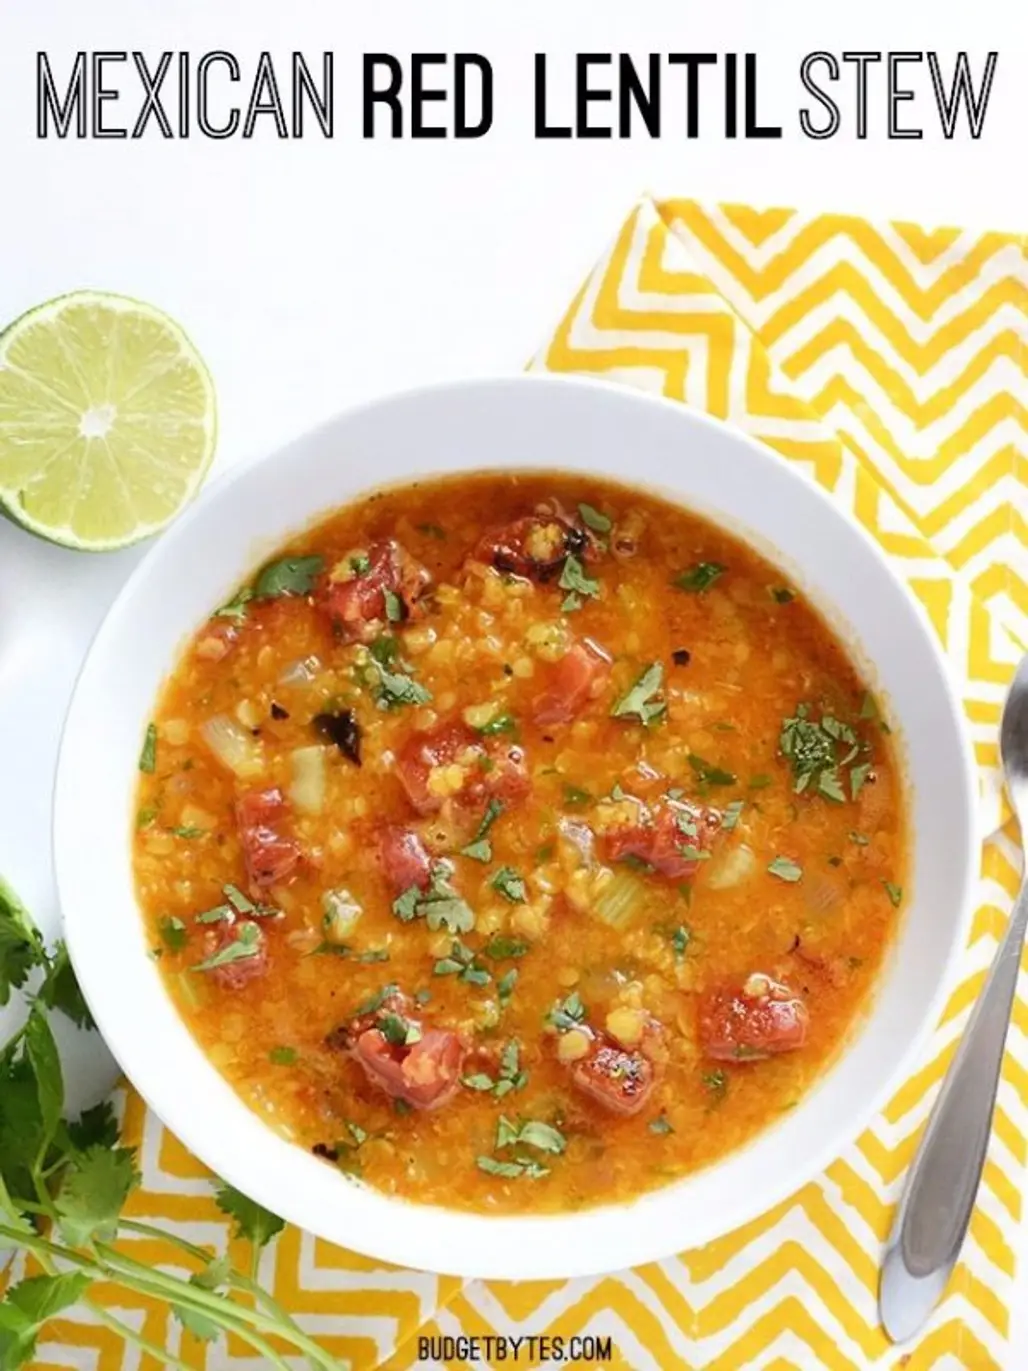 Mexican Red Lentil Stew